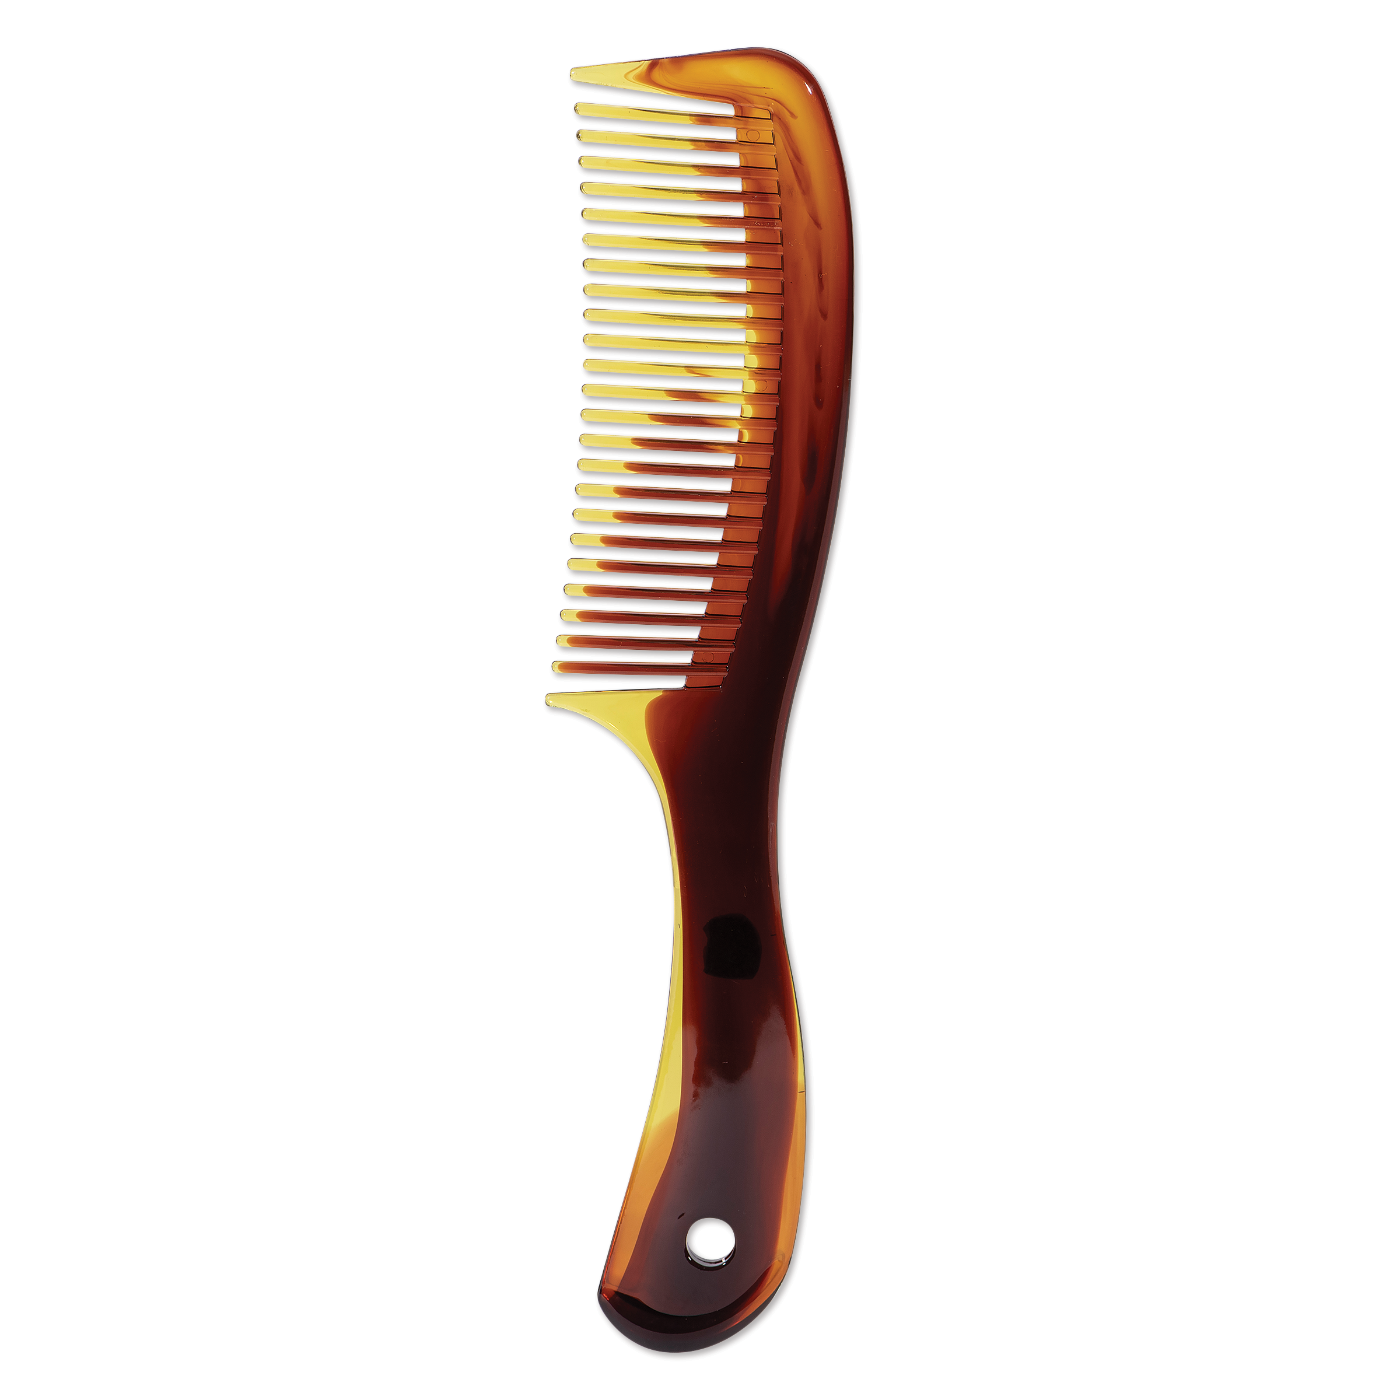 Wet Comb with Wide Teeth - 9"